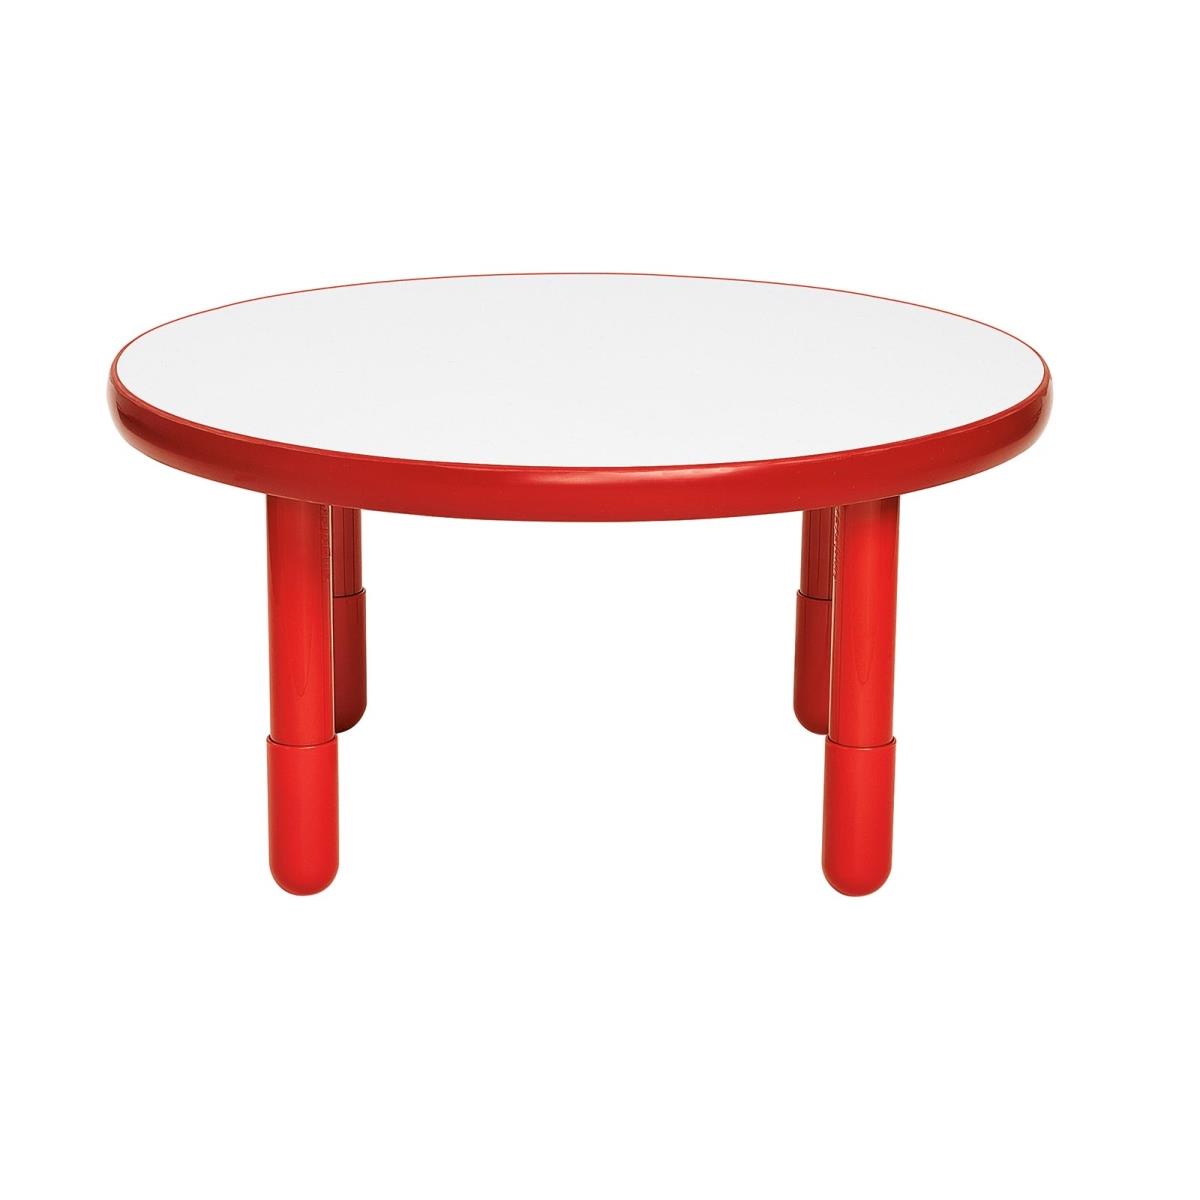 Ab749dpr18 36 X 18 In. Baseline Round Table With Legs, Candy Apple Red